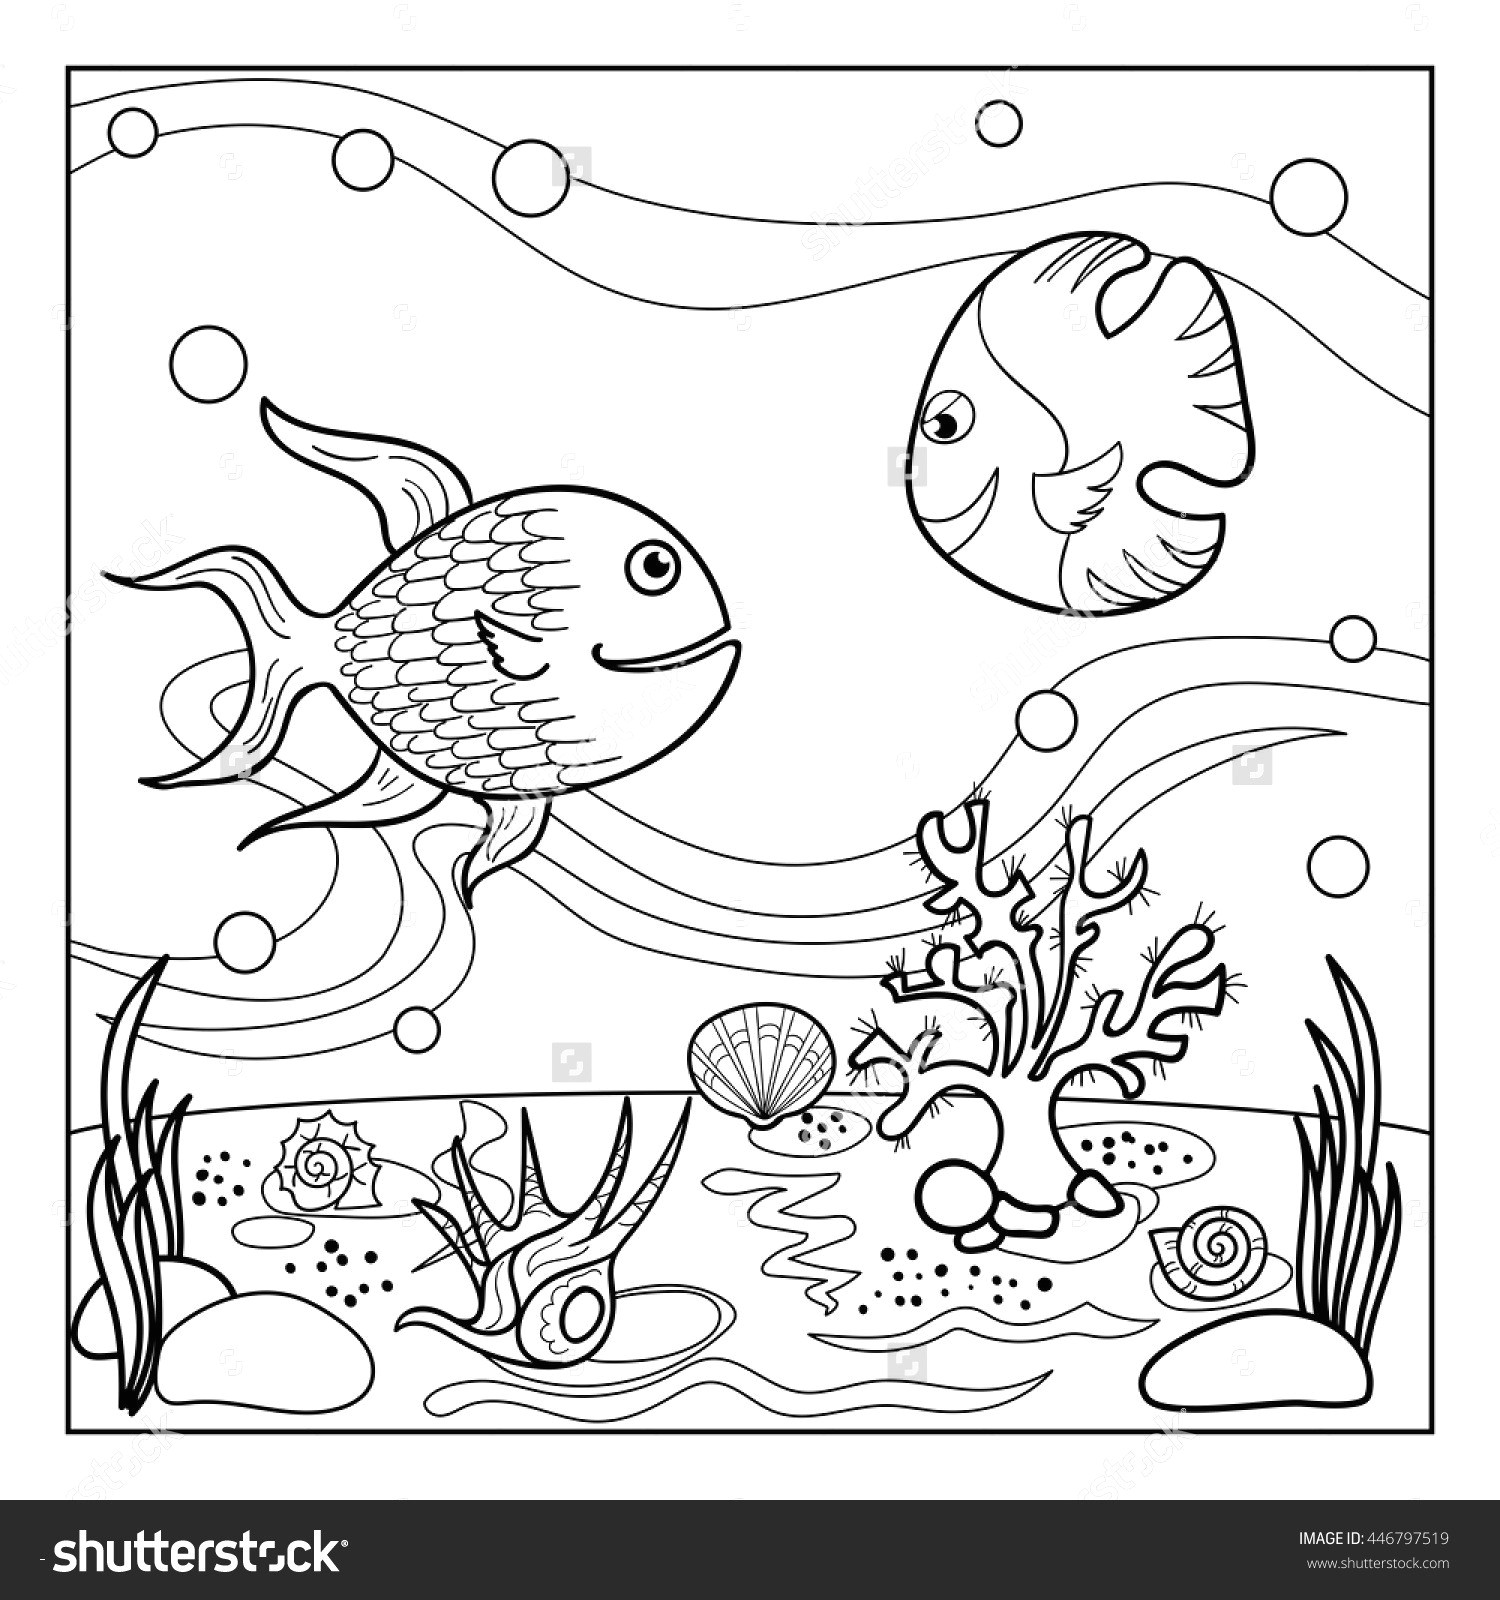 Drawing An Eye Easy Easy to Draw Feather Feather Coloring Page Fresh Home Coloring Pages